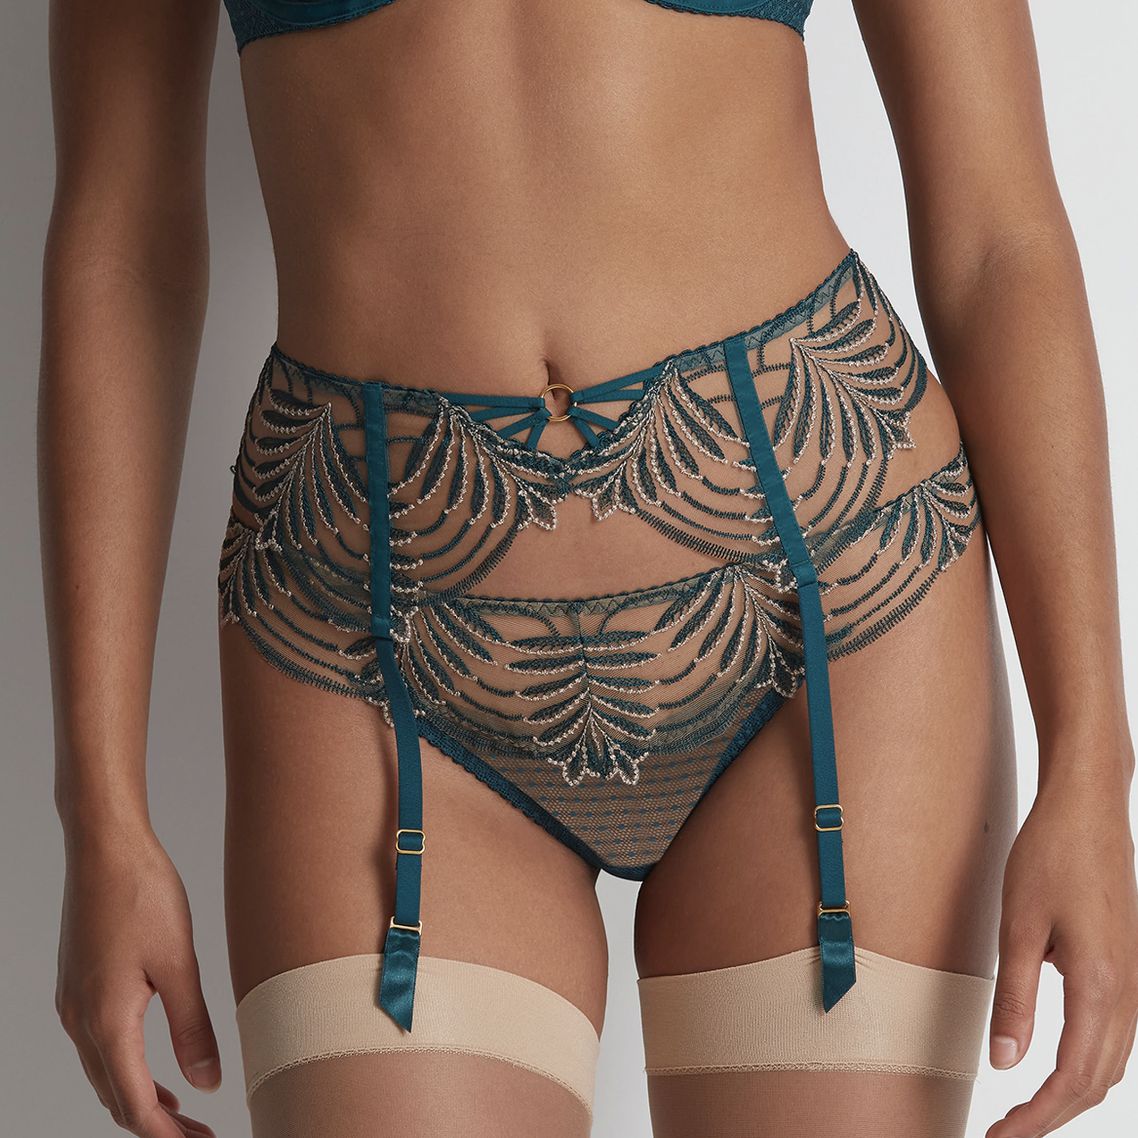 Aubade Hypnolove Suspender Belt in Evergreen LD50-Garter Belt-Aubade-Evergreen-XSmall-Anna Bella Fine Lingerie, Reveal Your Most Gorgeous Self!